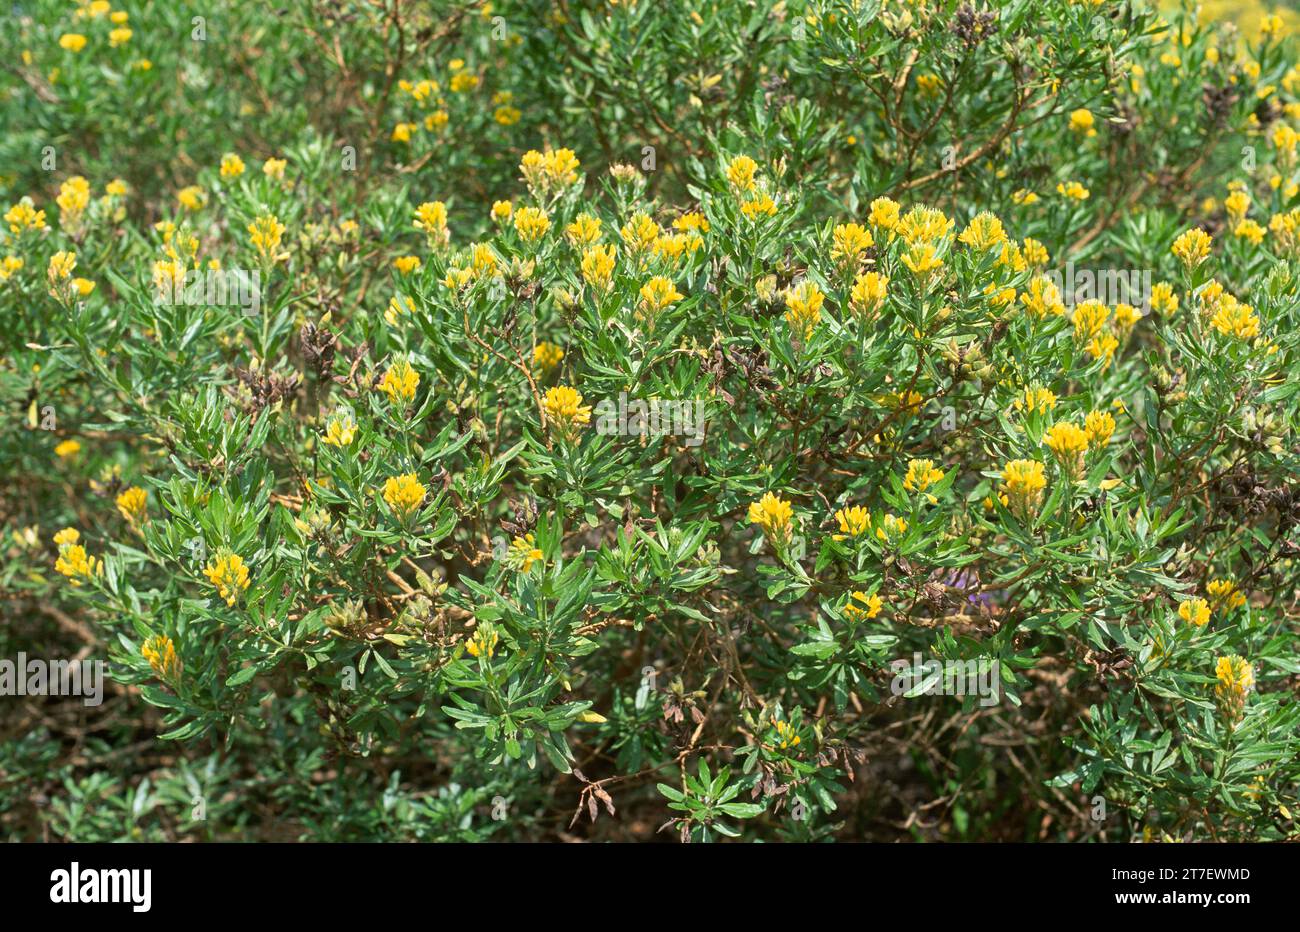 Needle-leaved broom (Genista linifolia) is a shrub native to Canary Islands, southern Iberian Peninsula and northwestern Africa. Stock Photo